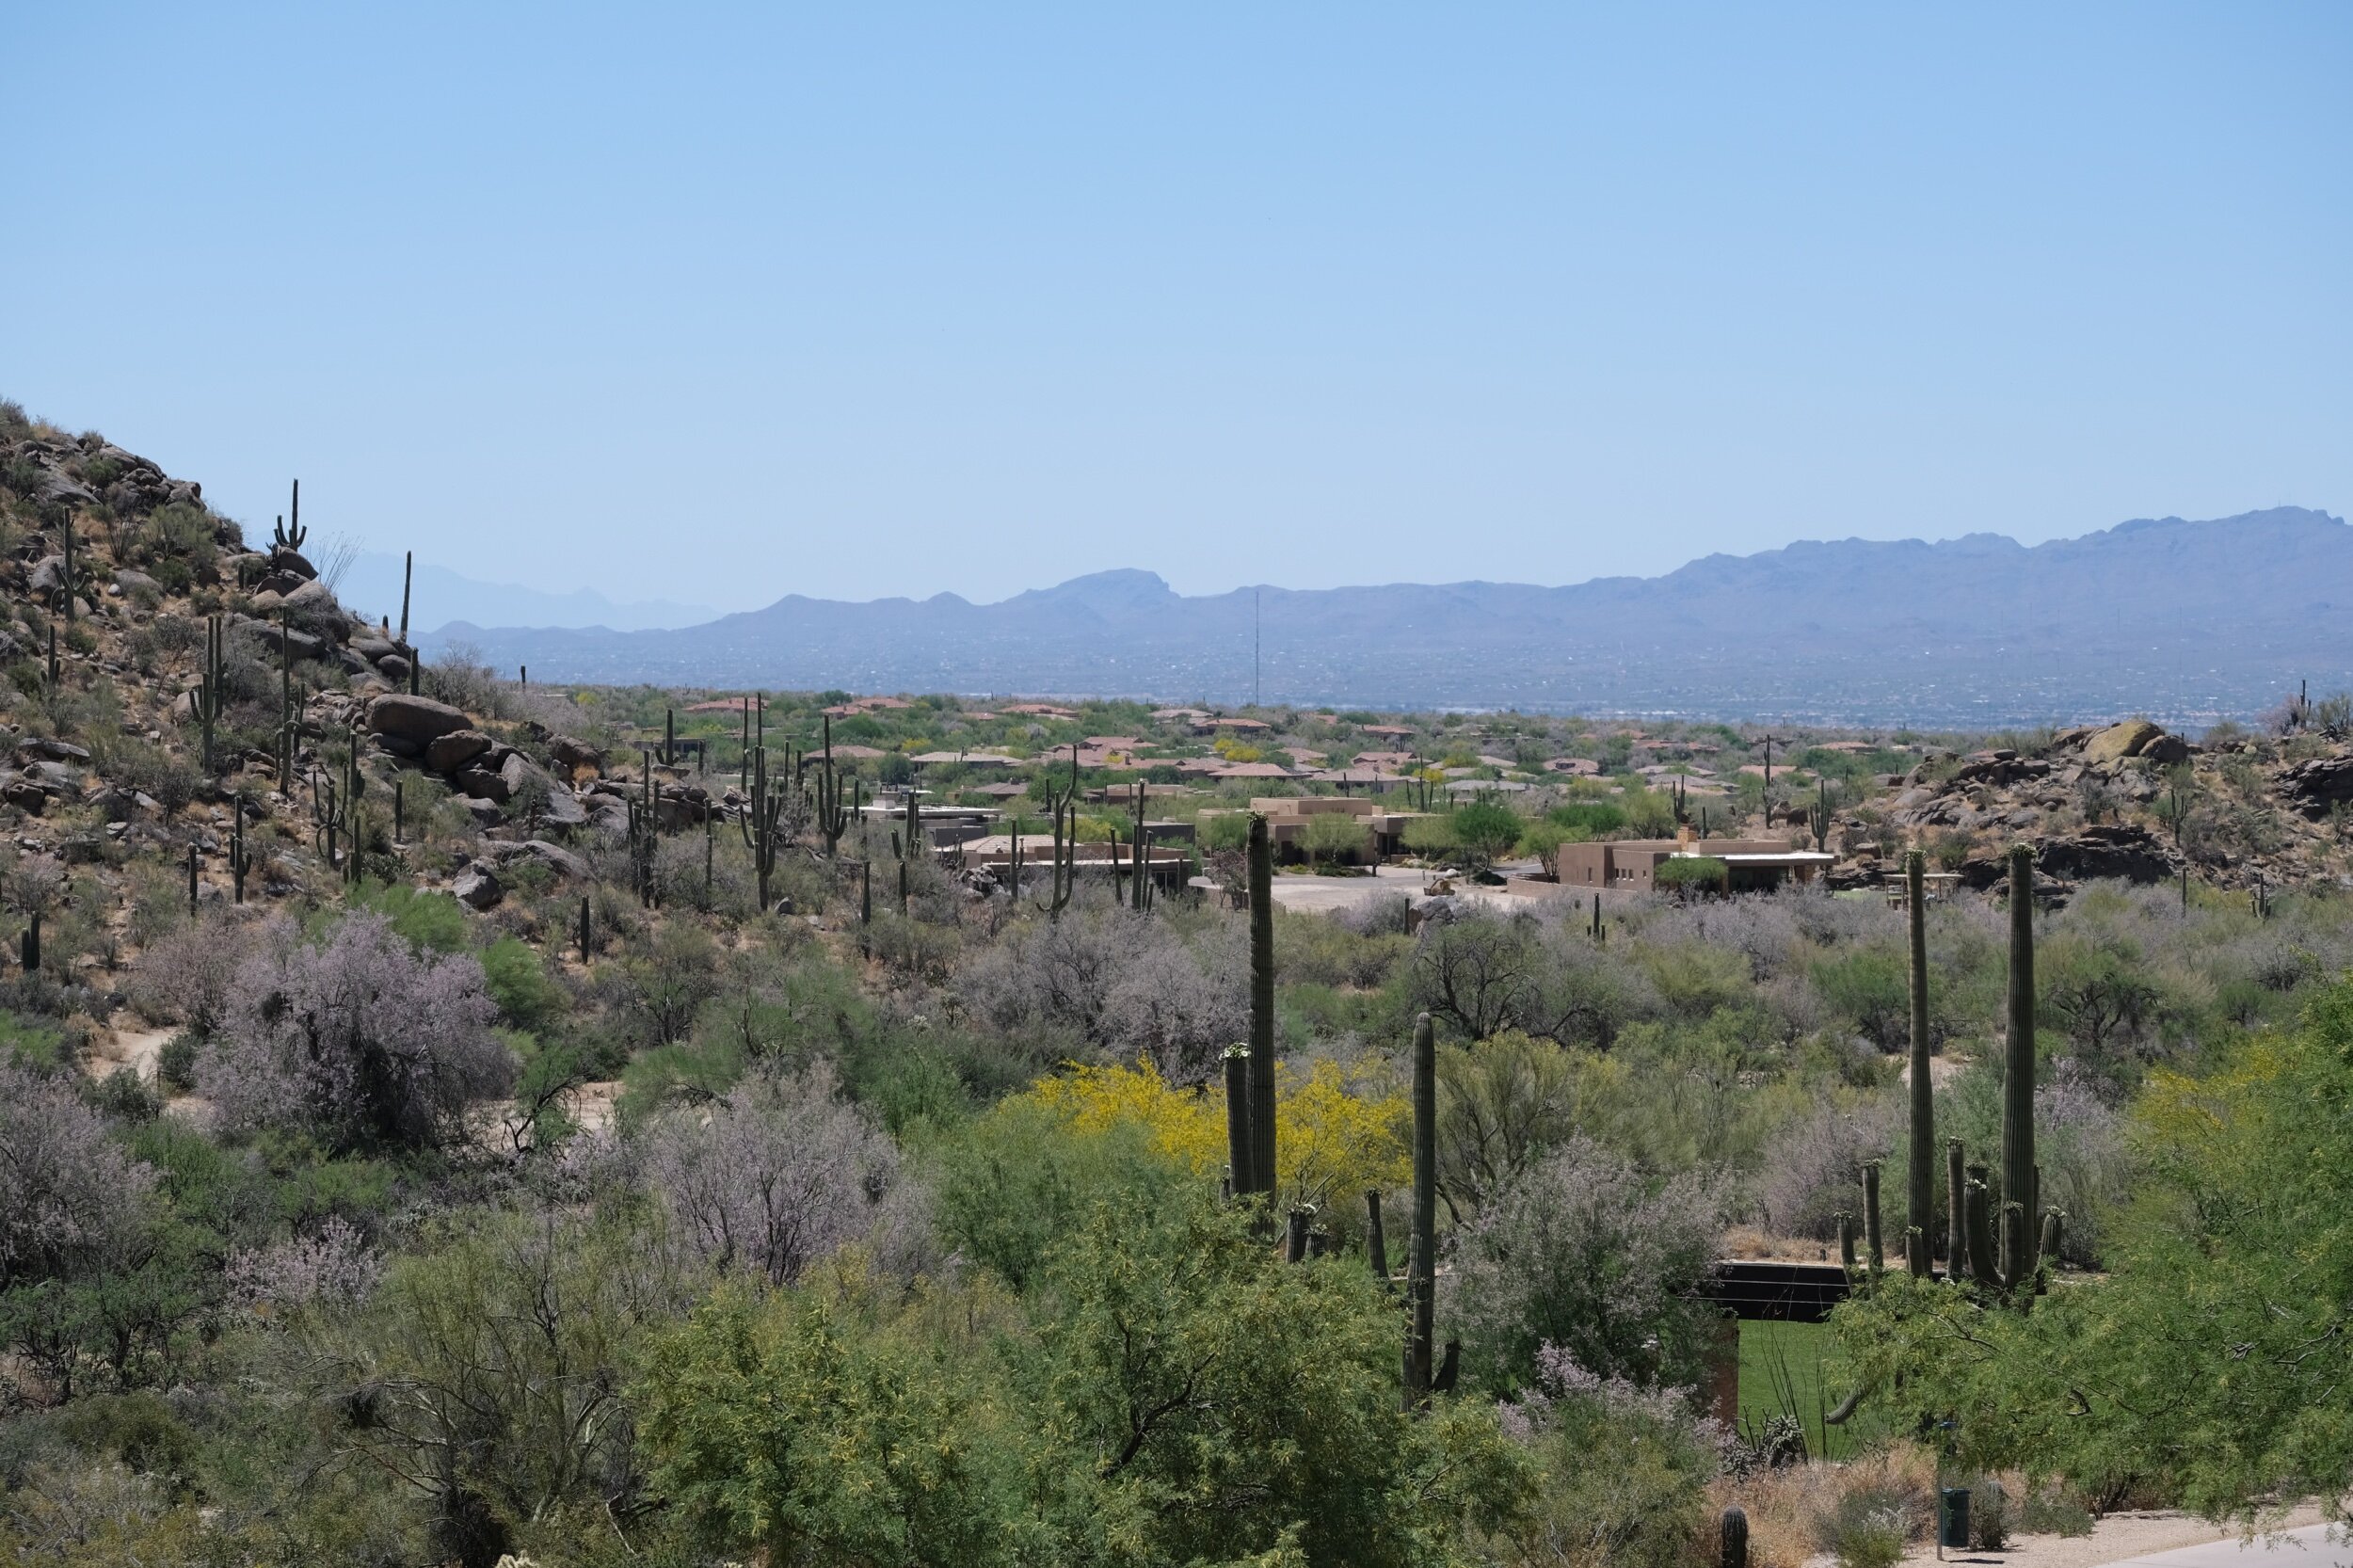 A View of the Saguaro Fields